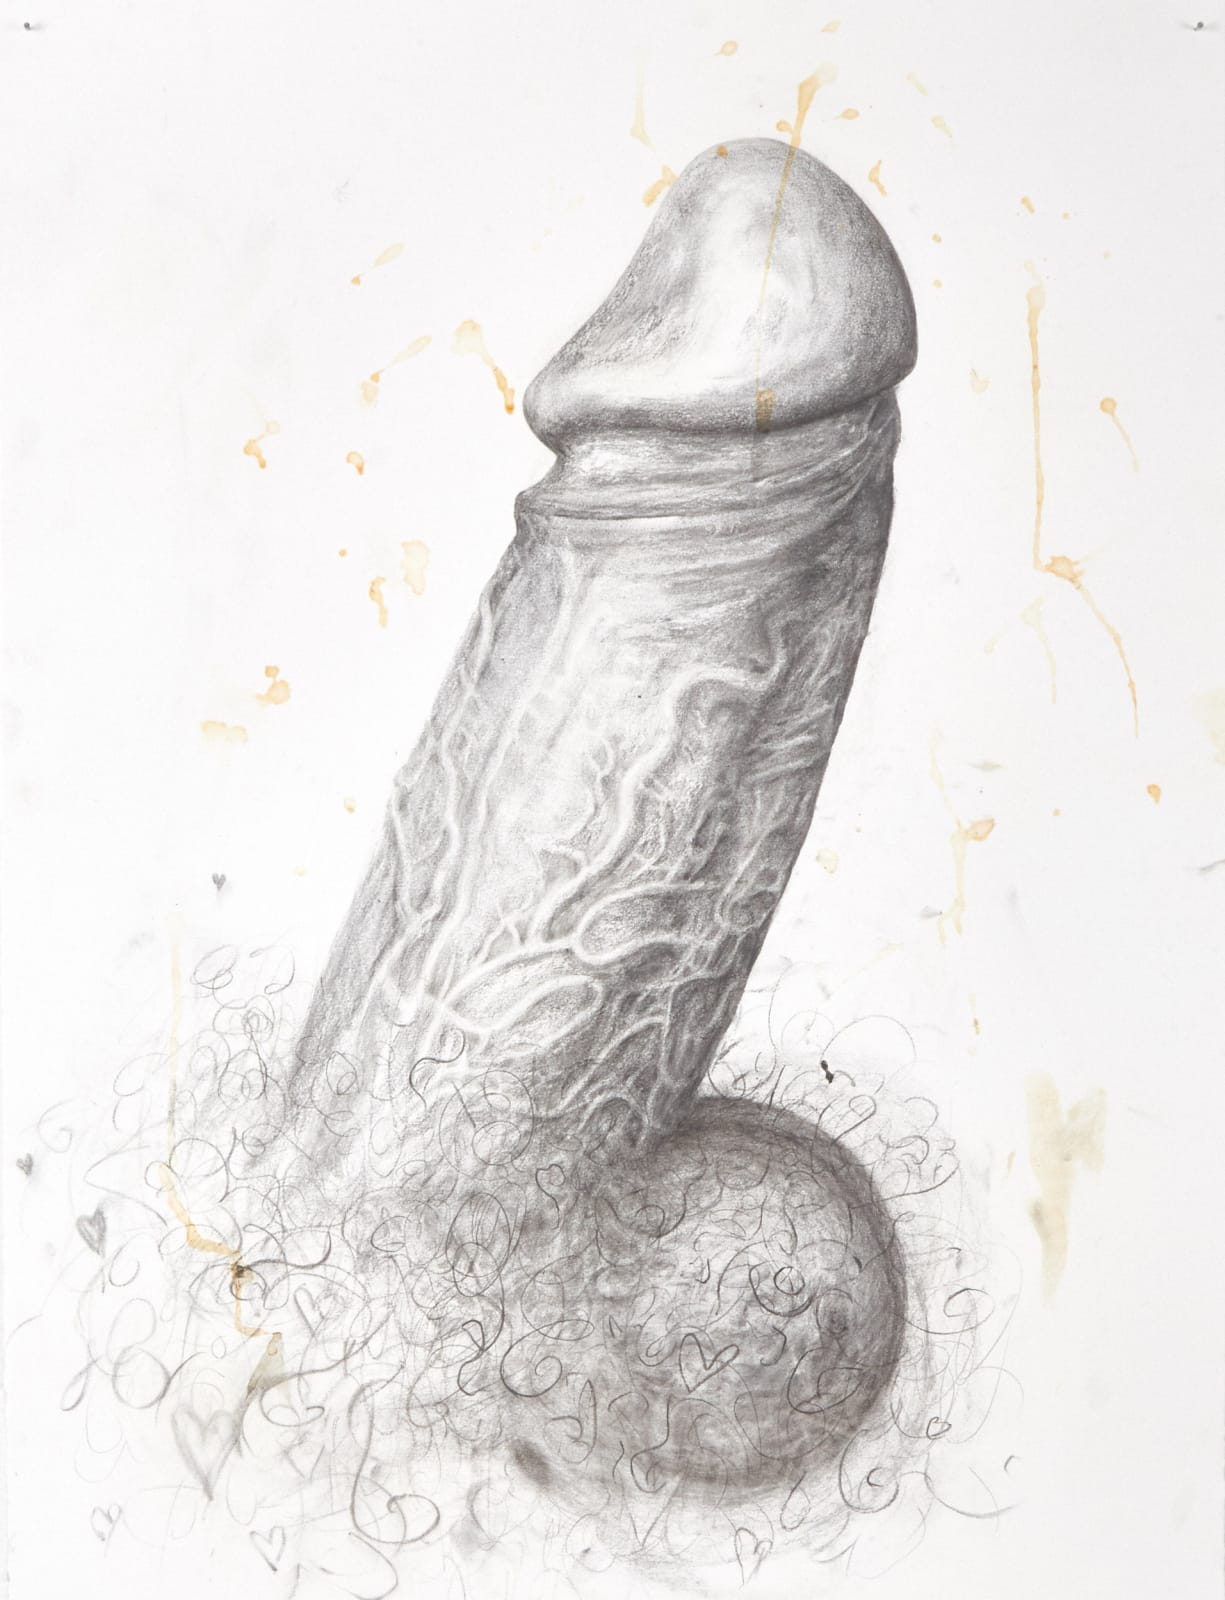 Dick with cum drawing realistic